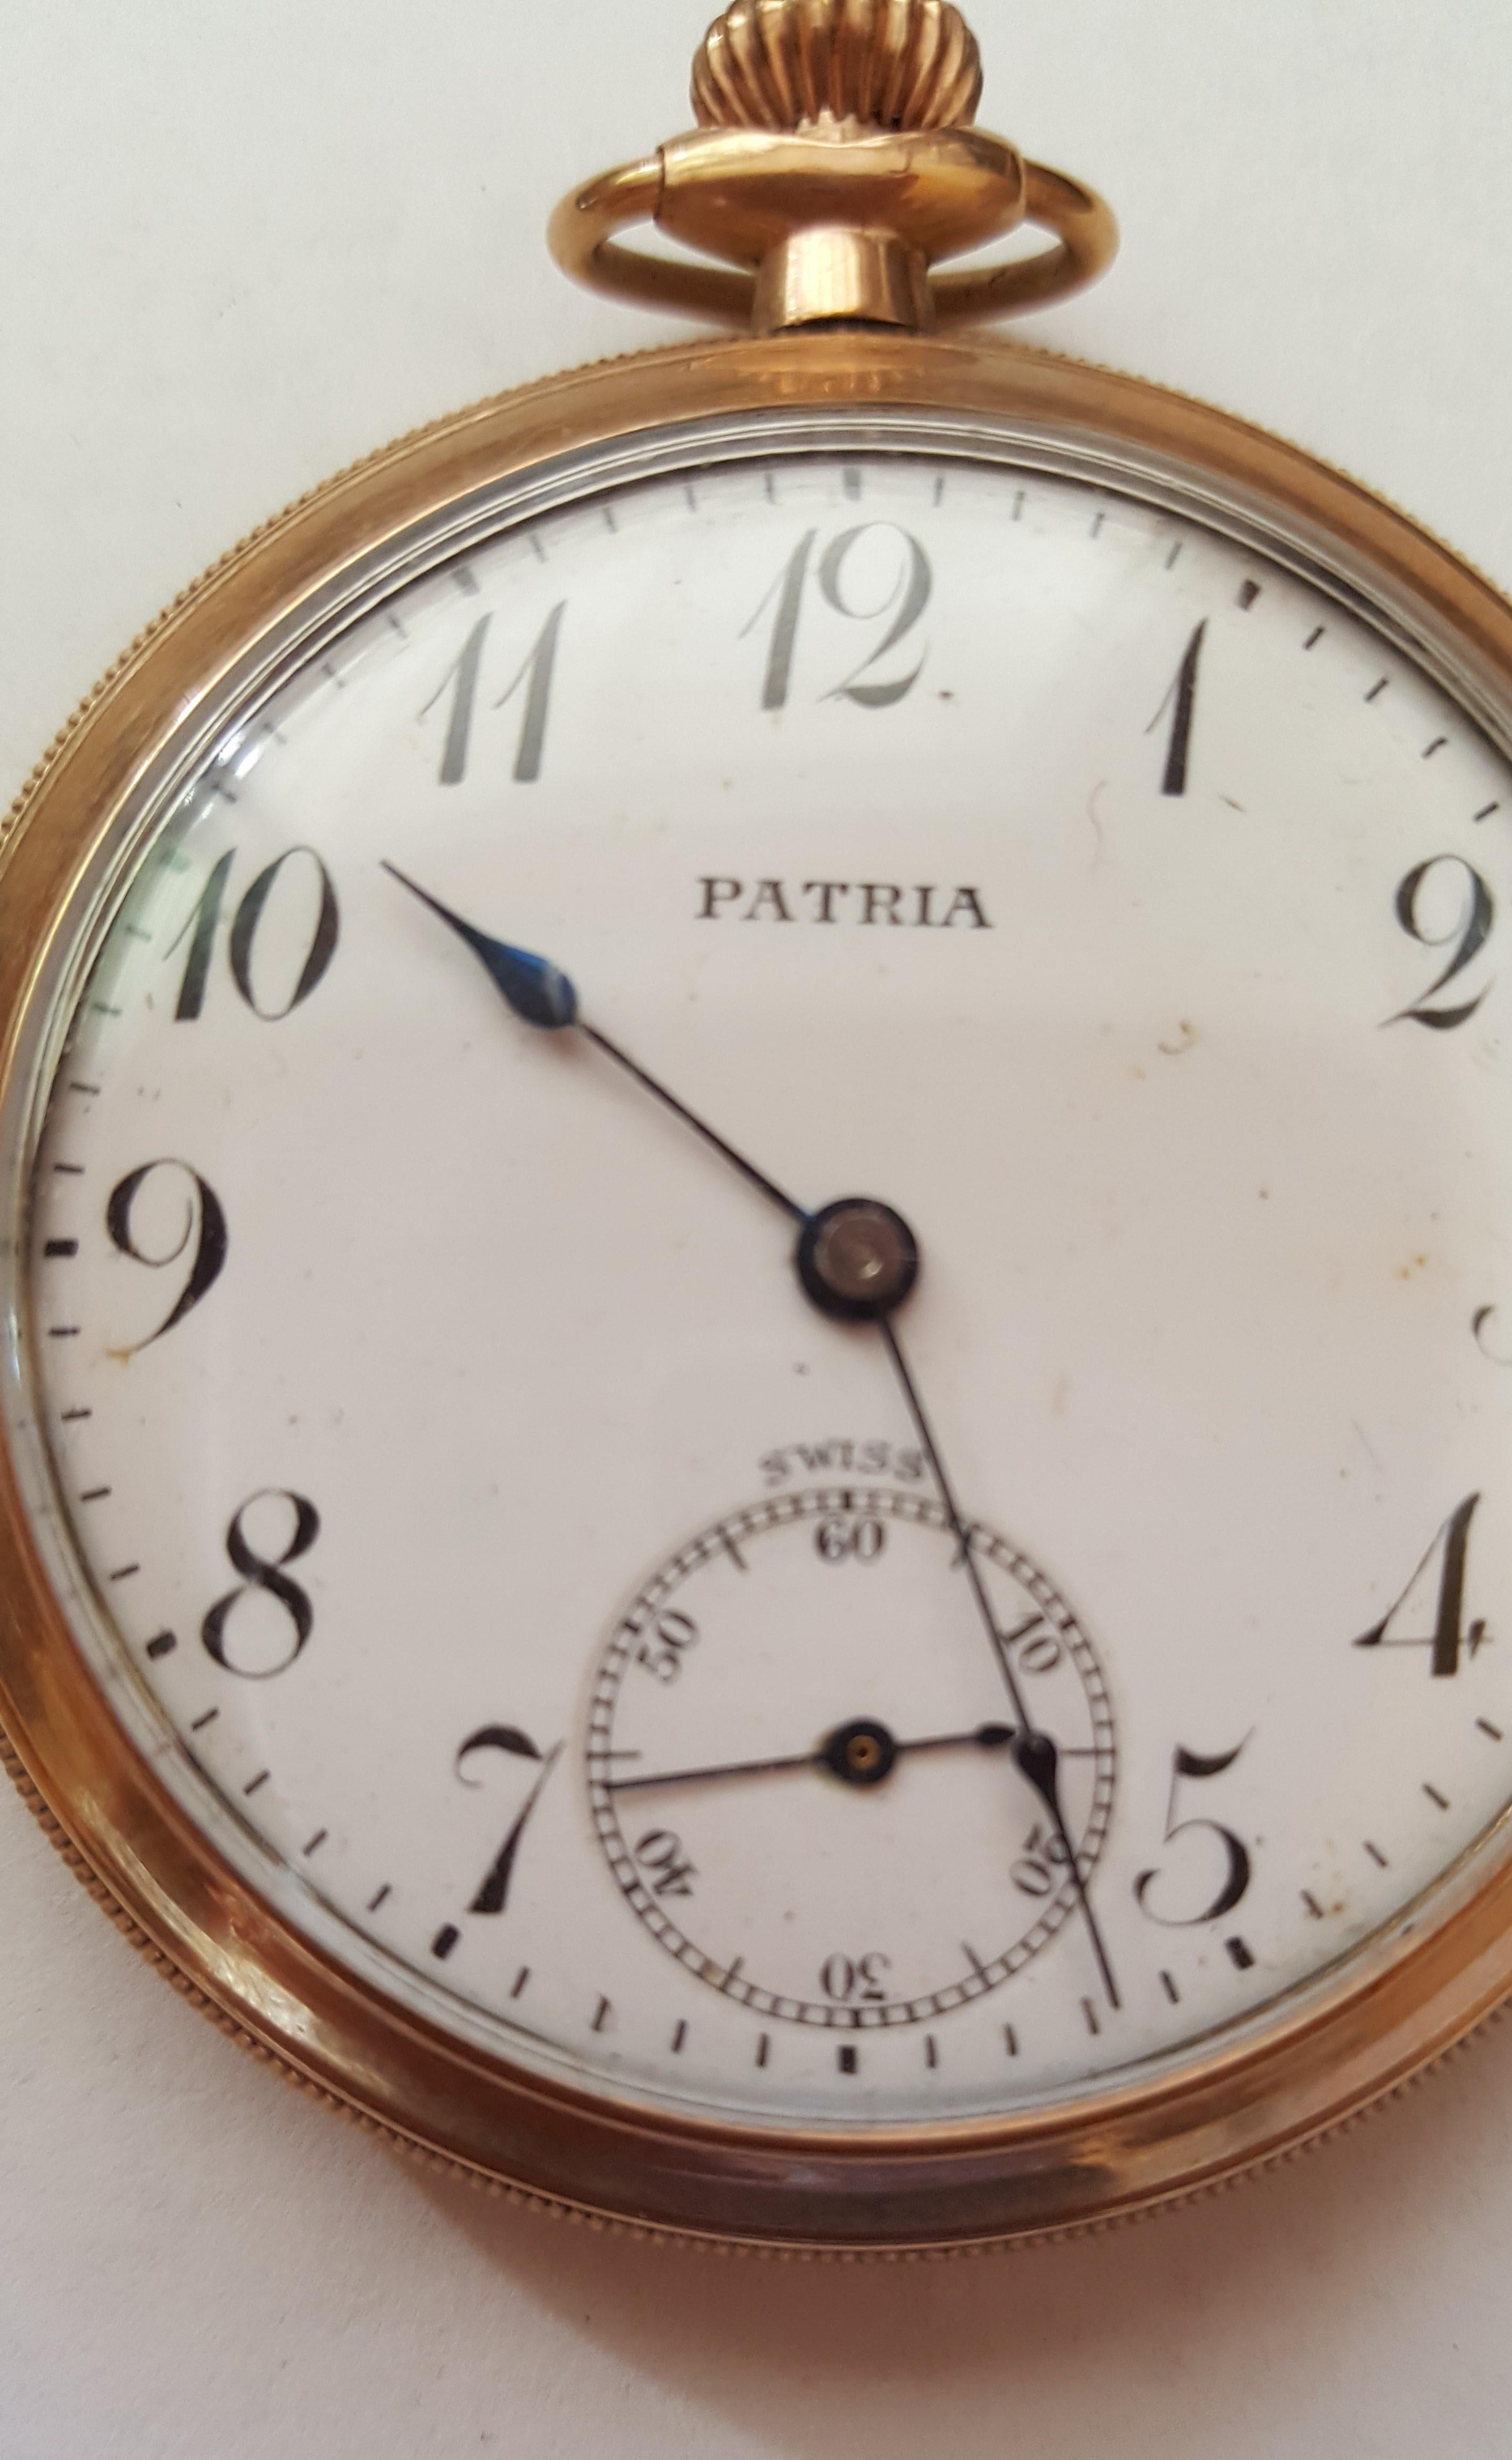 Women's or Men's Vintage 1930s Patina Pocket Watch, Working, Self Winding, Very Good Condition